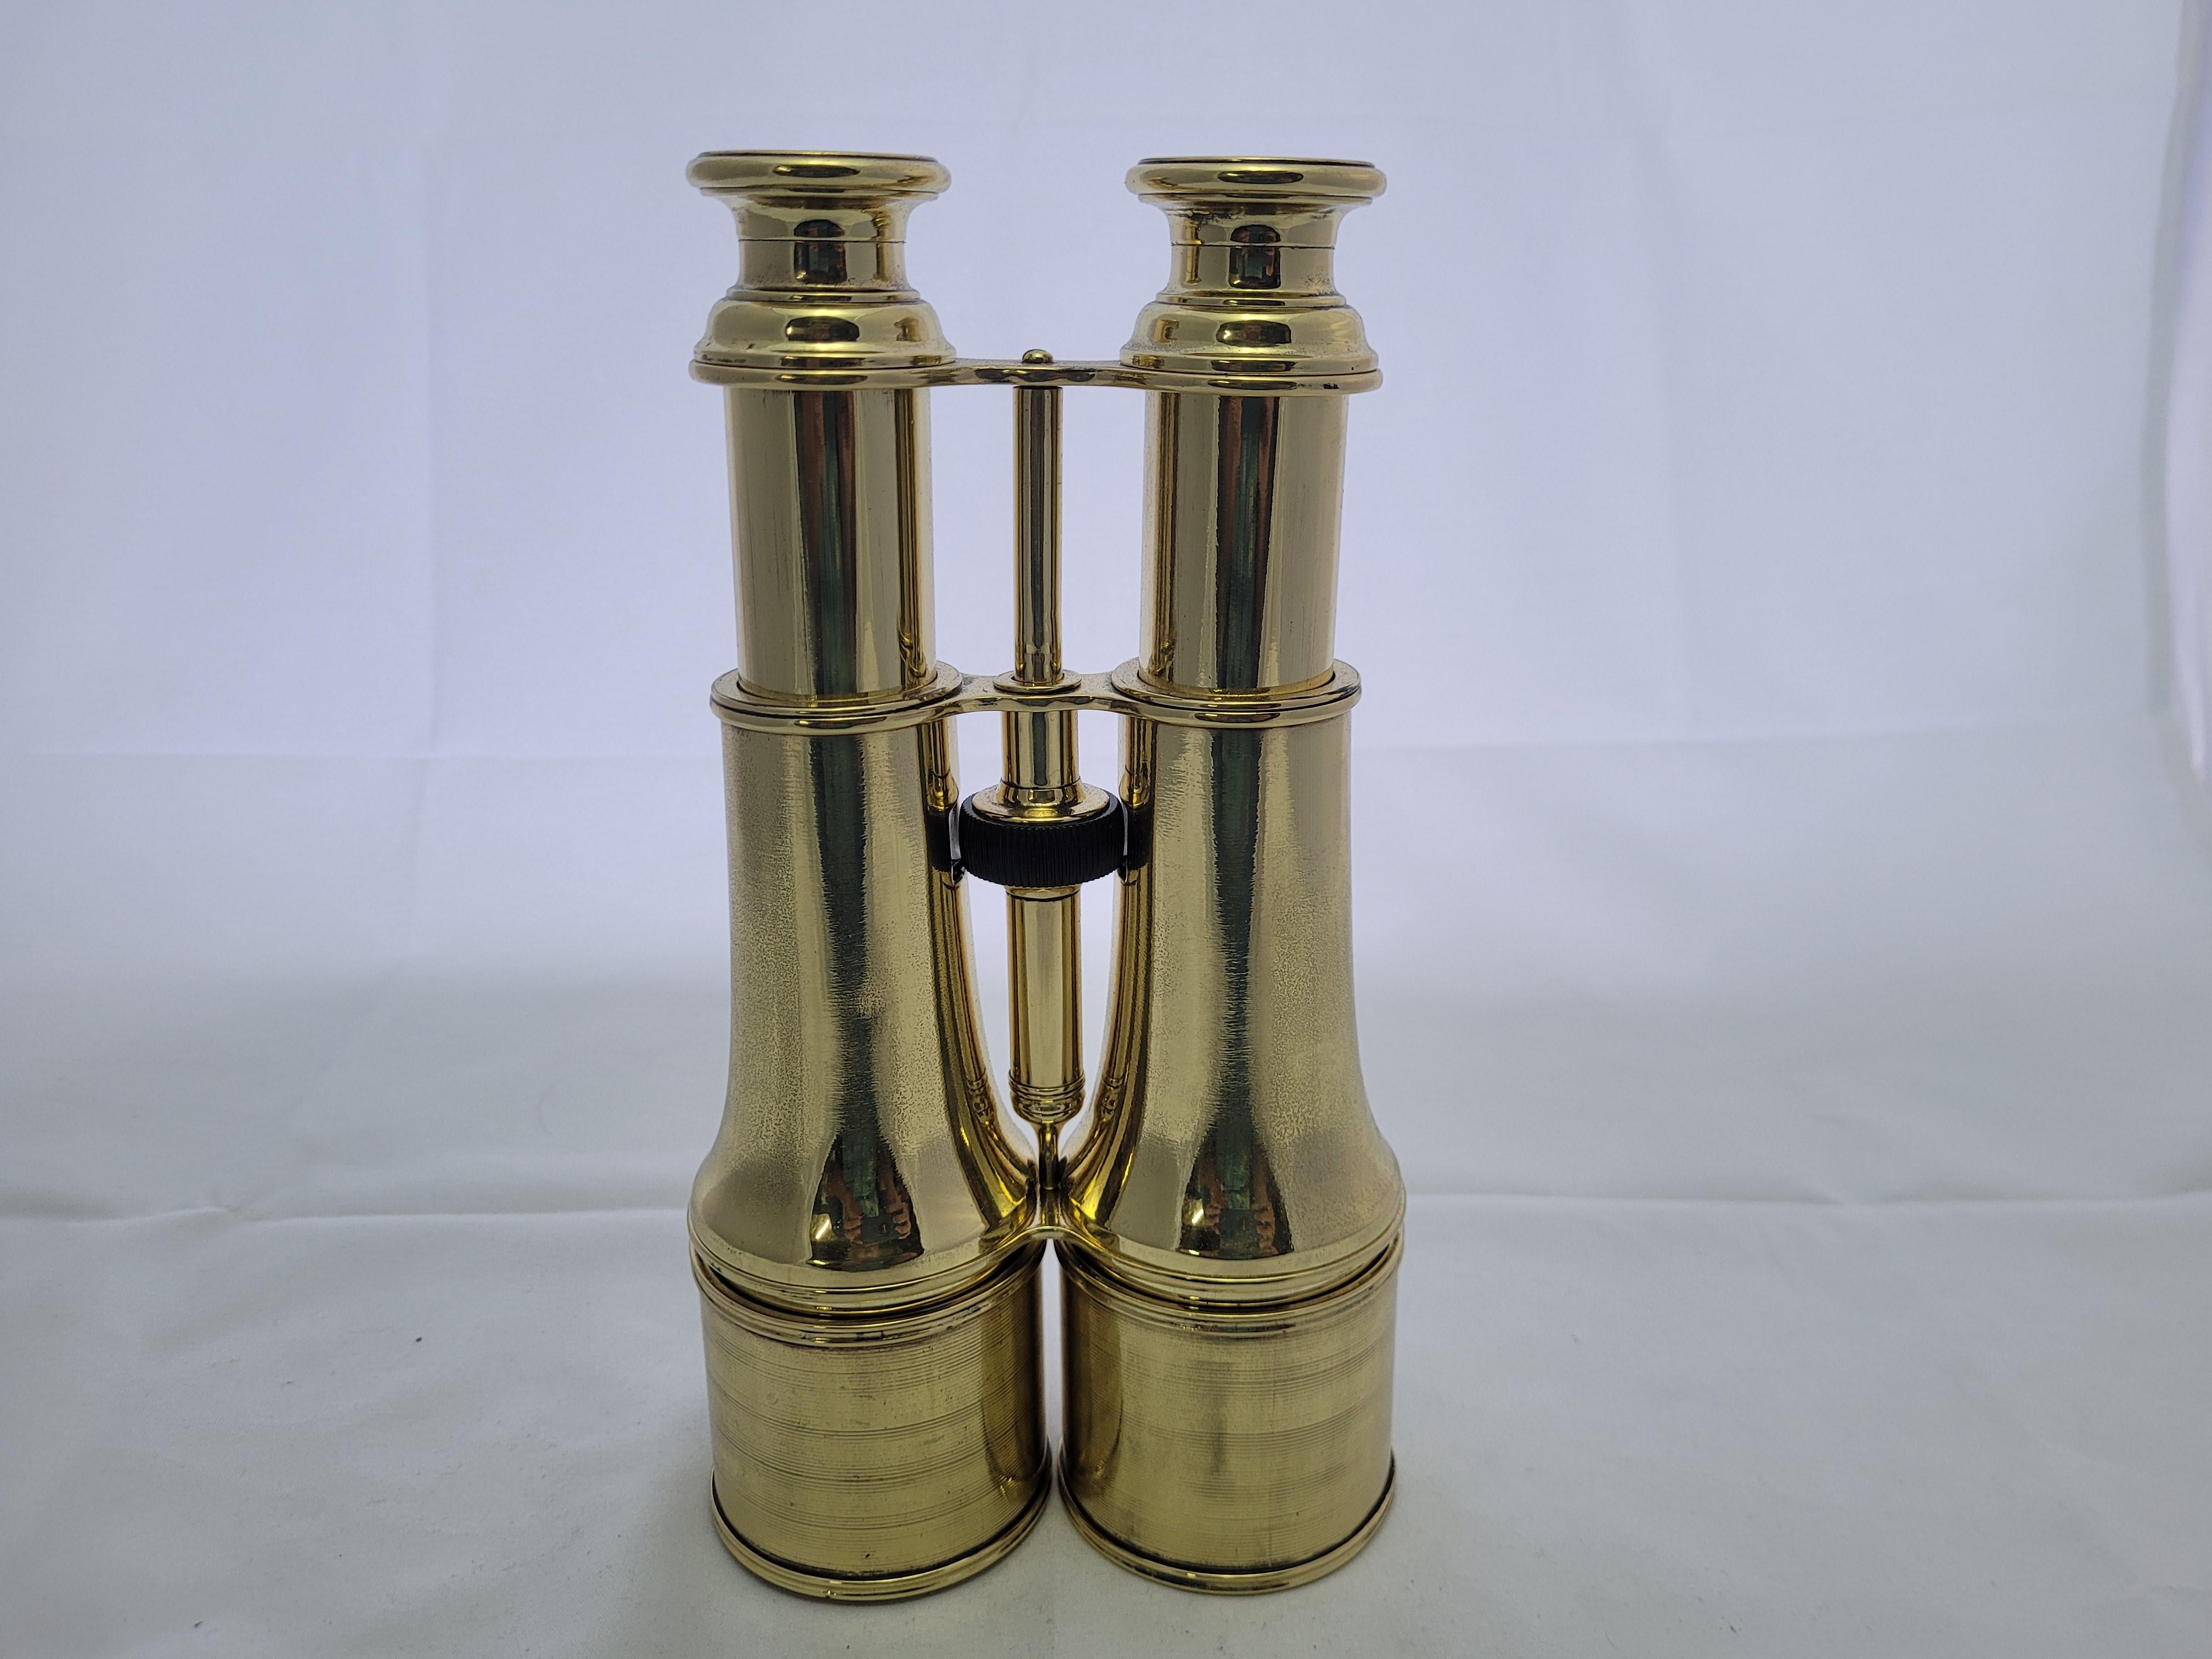 European French Yachting Binoculars by Lemaire Fabt, Paris For Sale